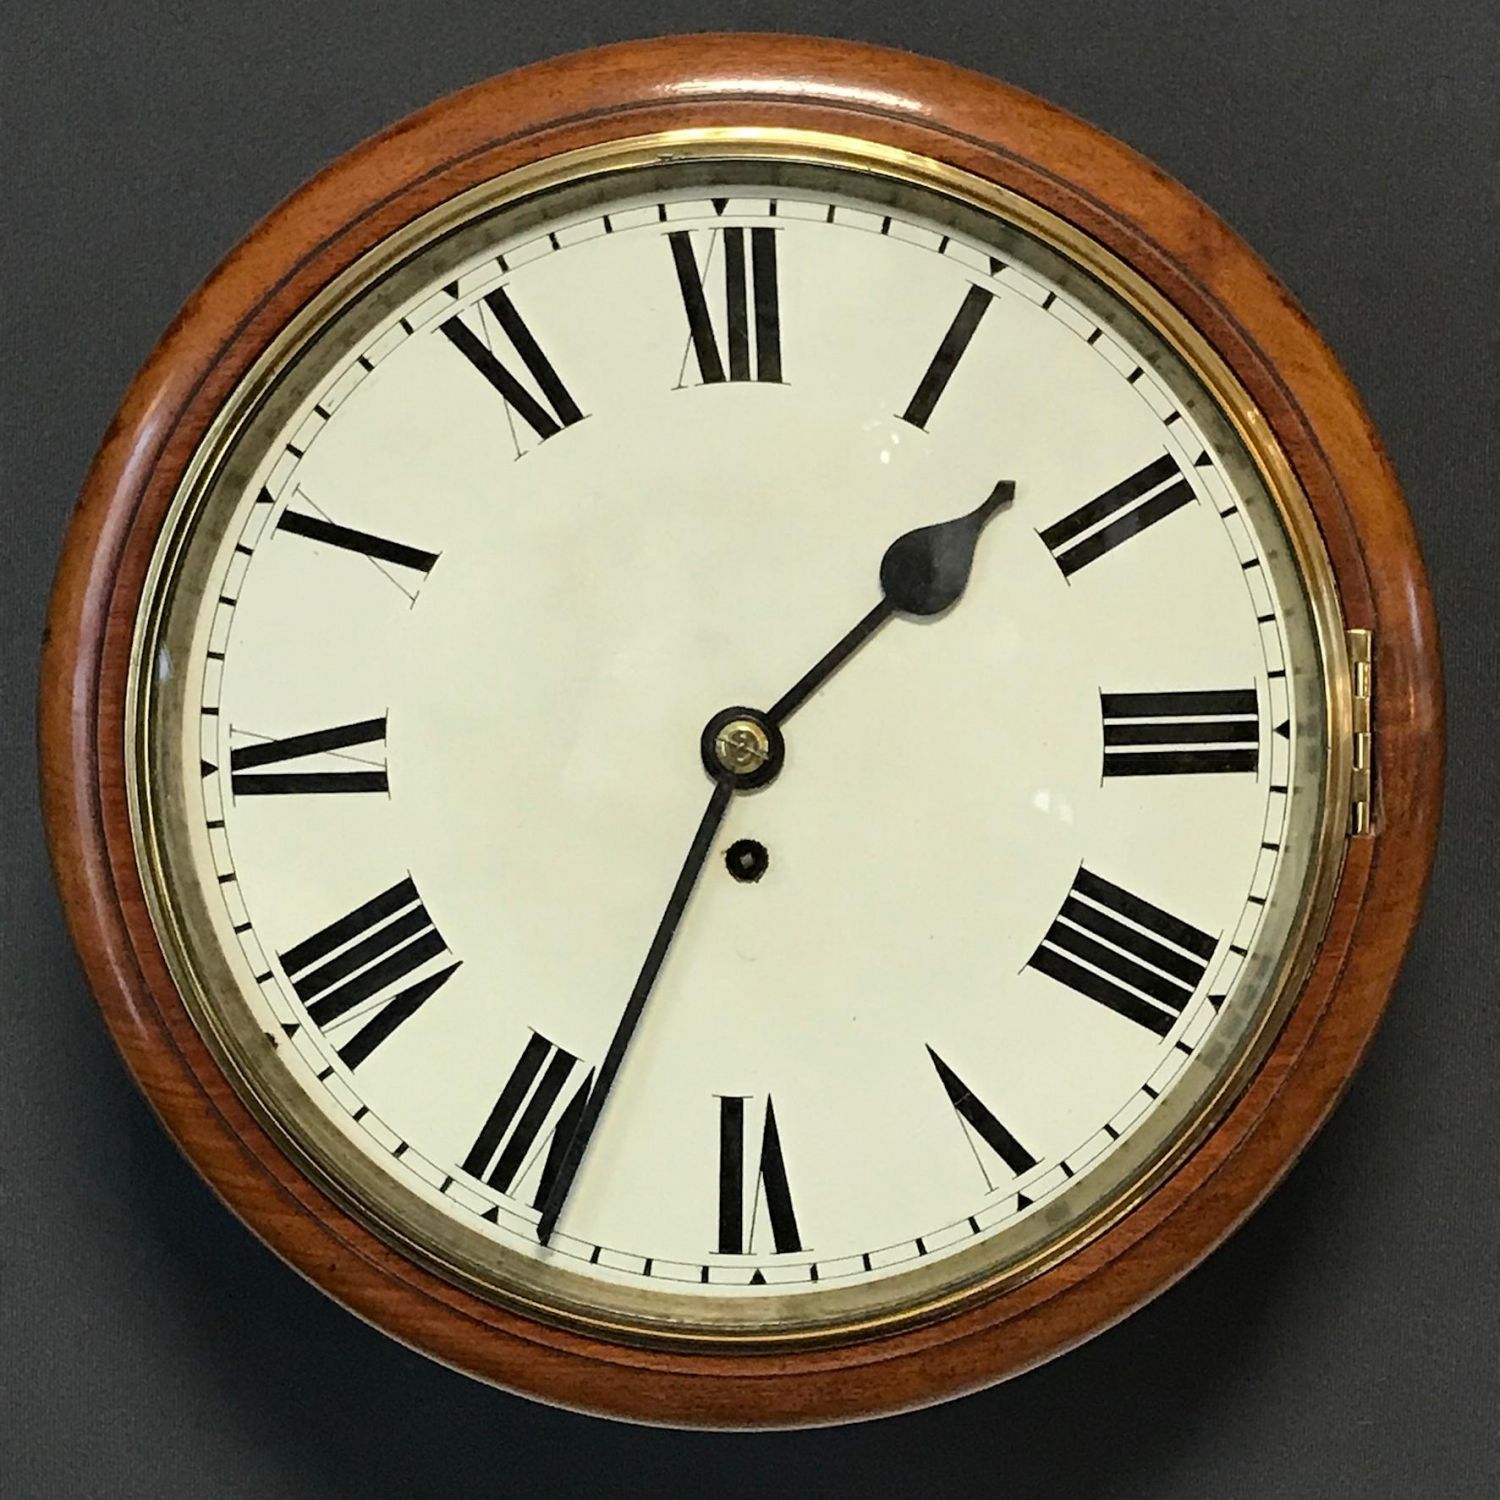 Late Victorian 8-Day Fusee Wall Clock - Wall Clocks - Hemswell Antique ...